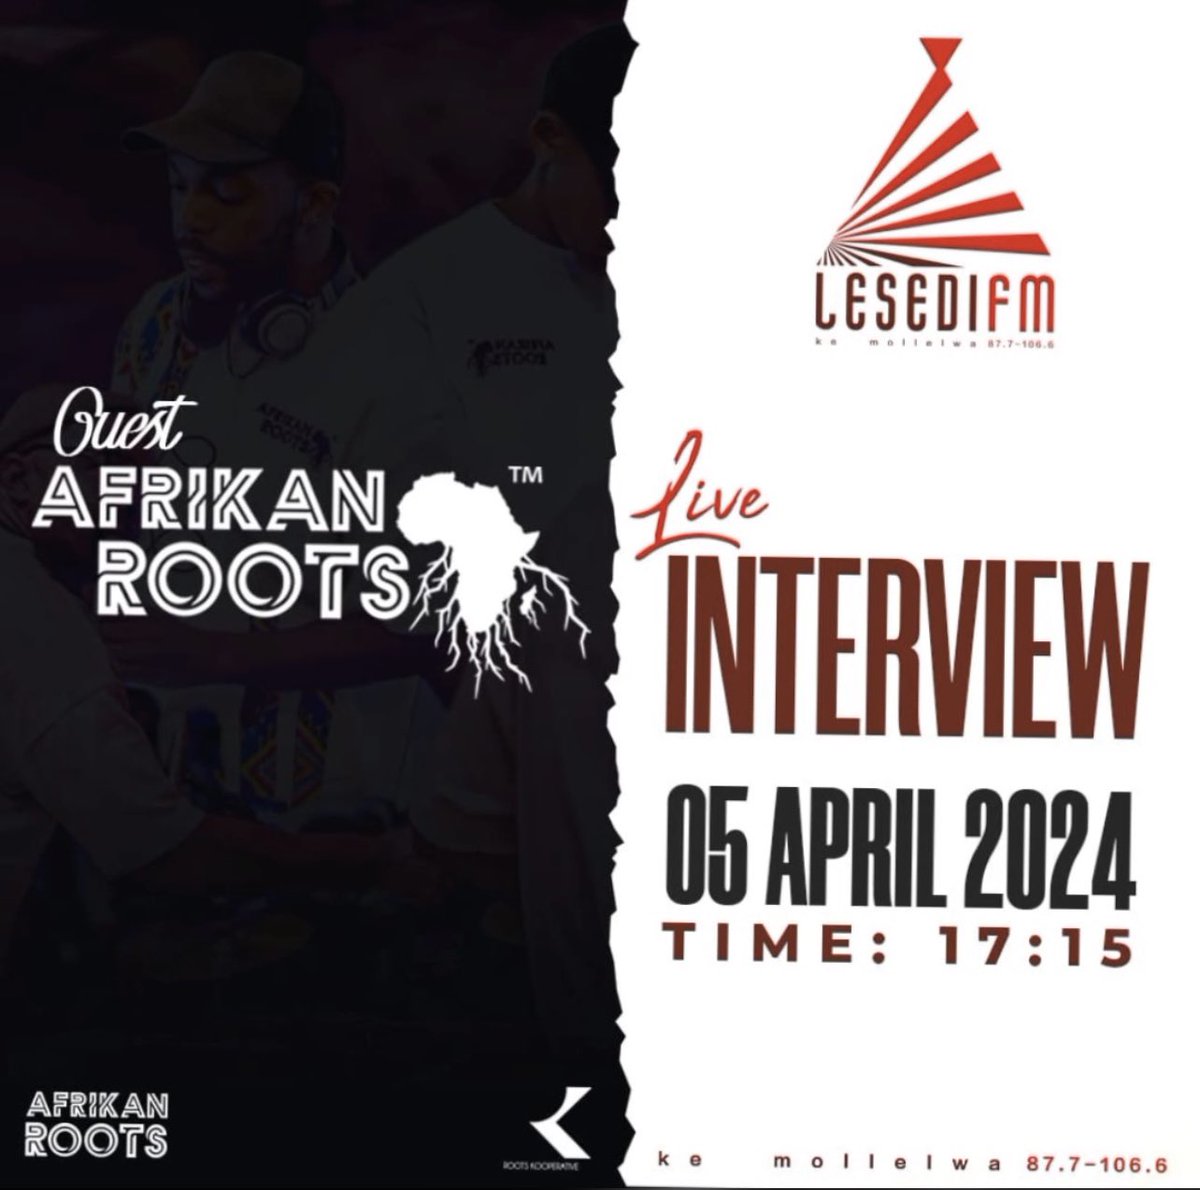 Catch Afrikan Roots today @LesediFM Time: 17:15